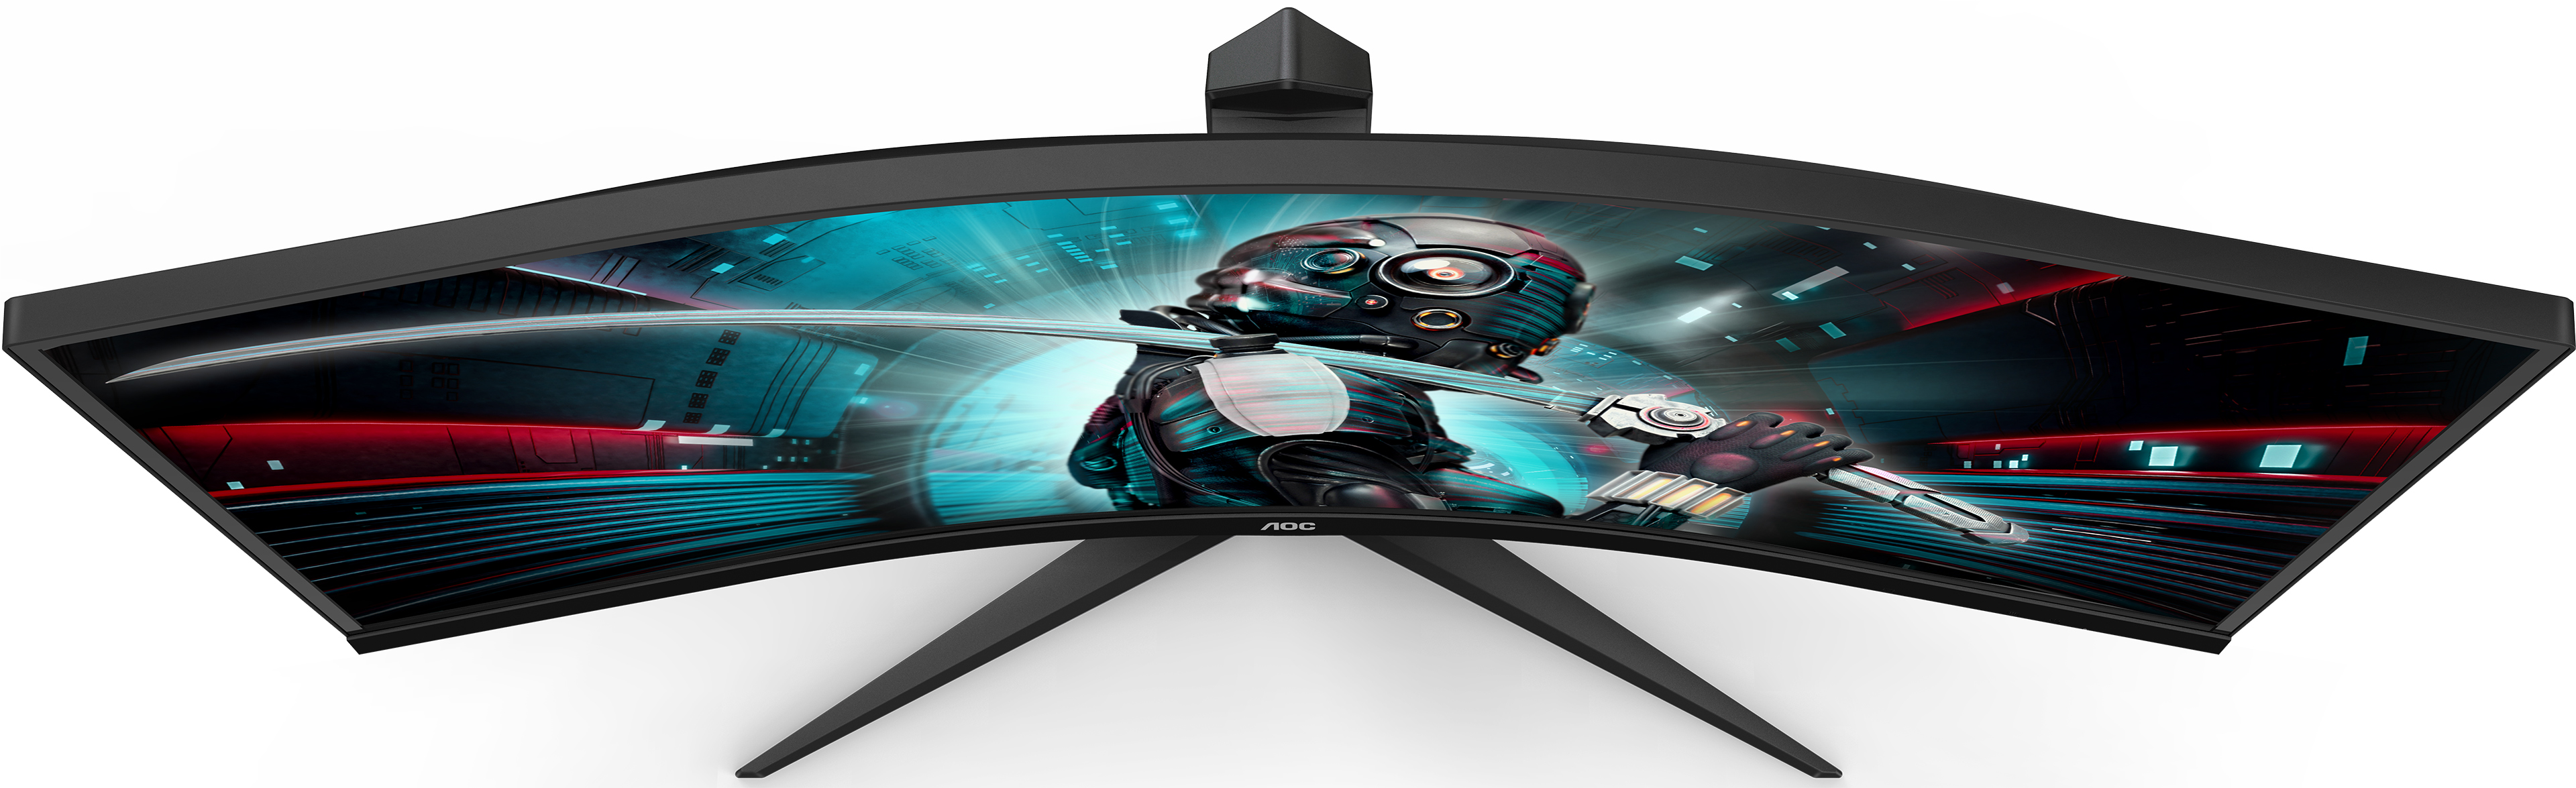 AOC Reveals Two 34-Inch Gaming & Hz 144 Monitors: Up Curved FreeSync to